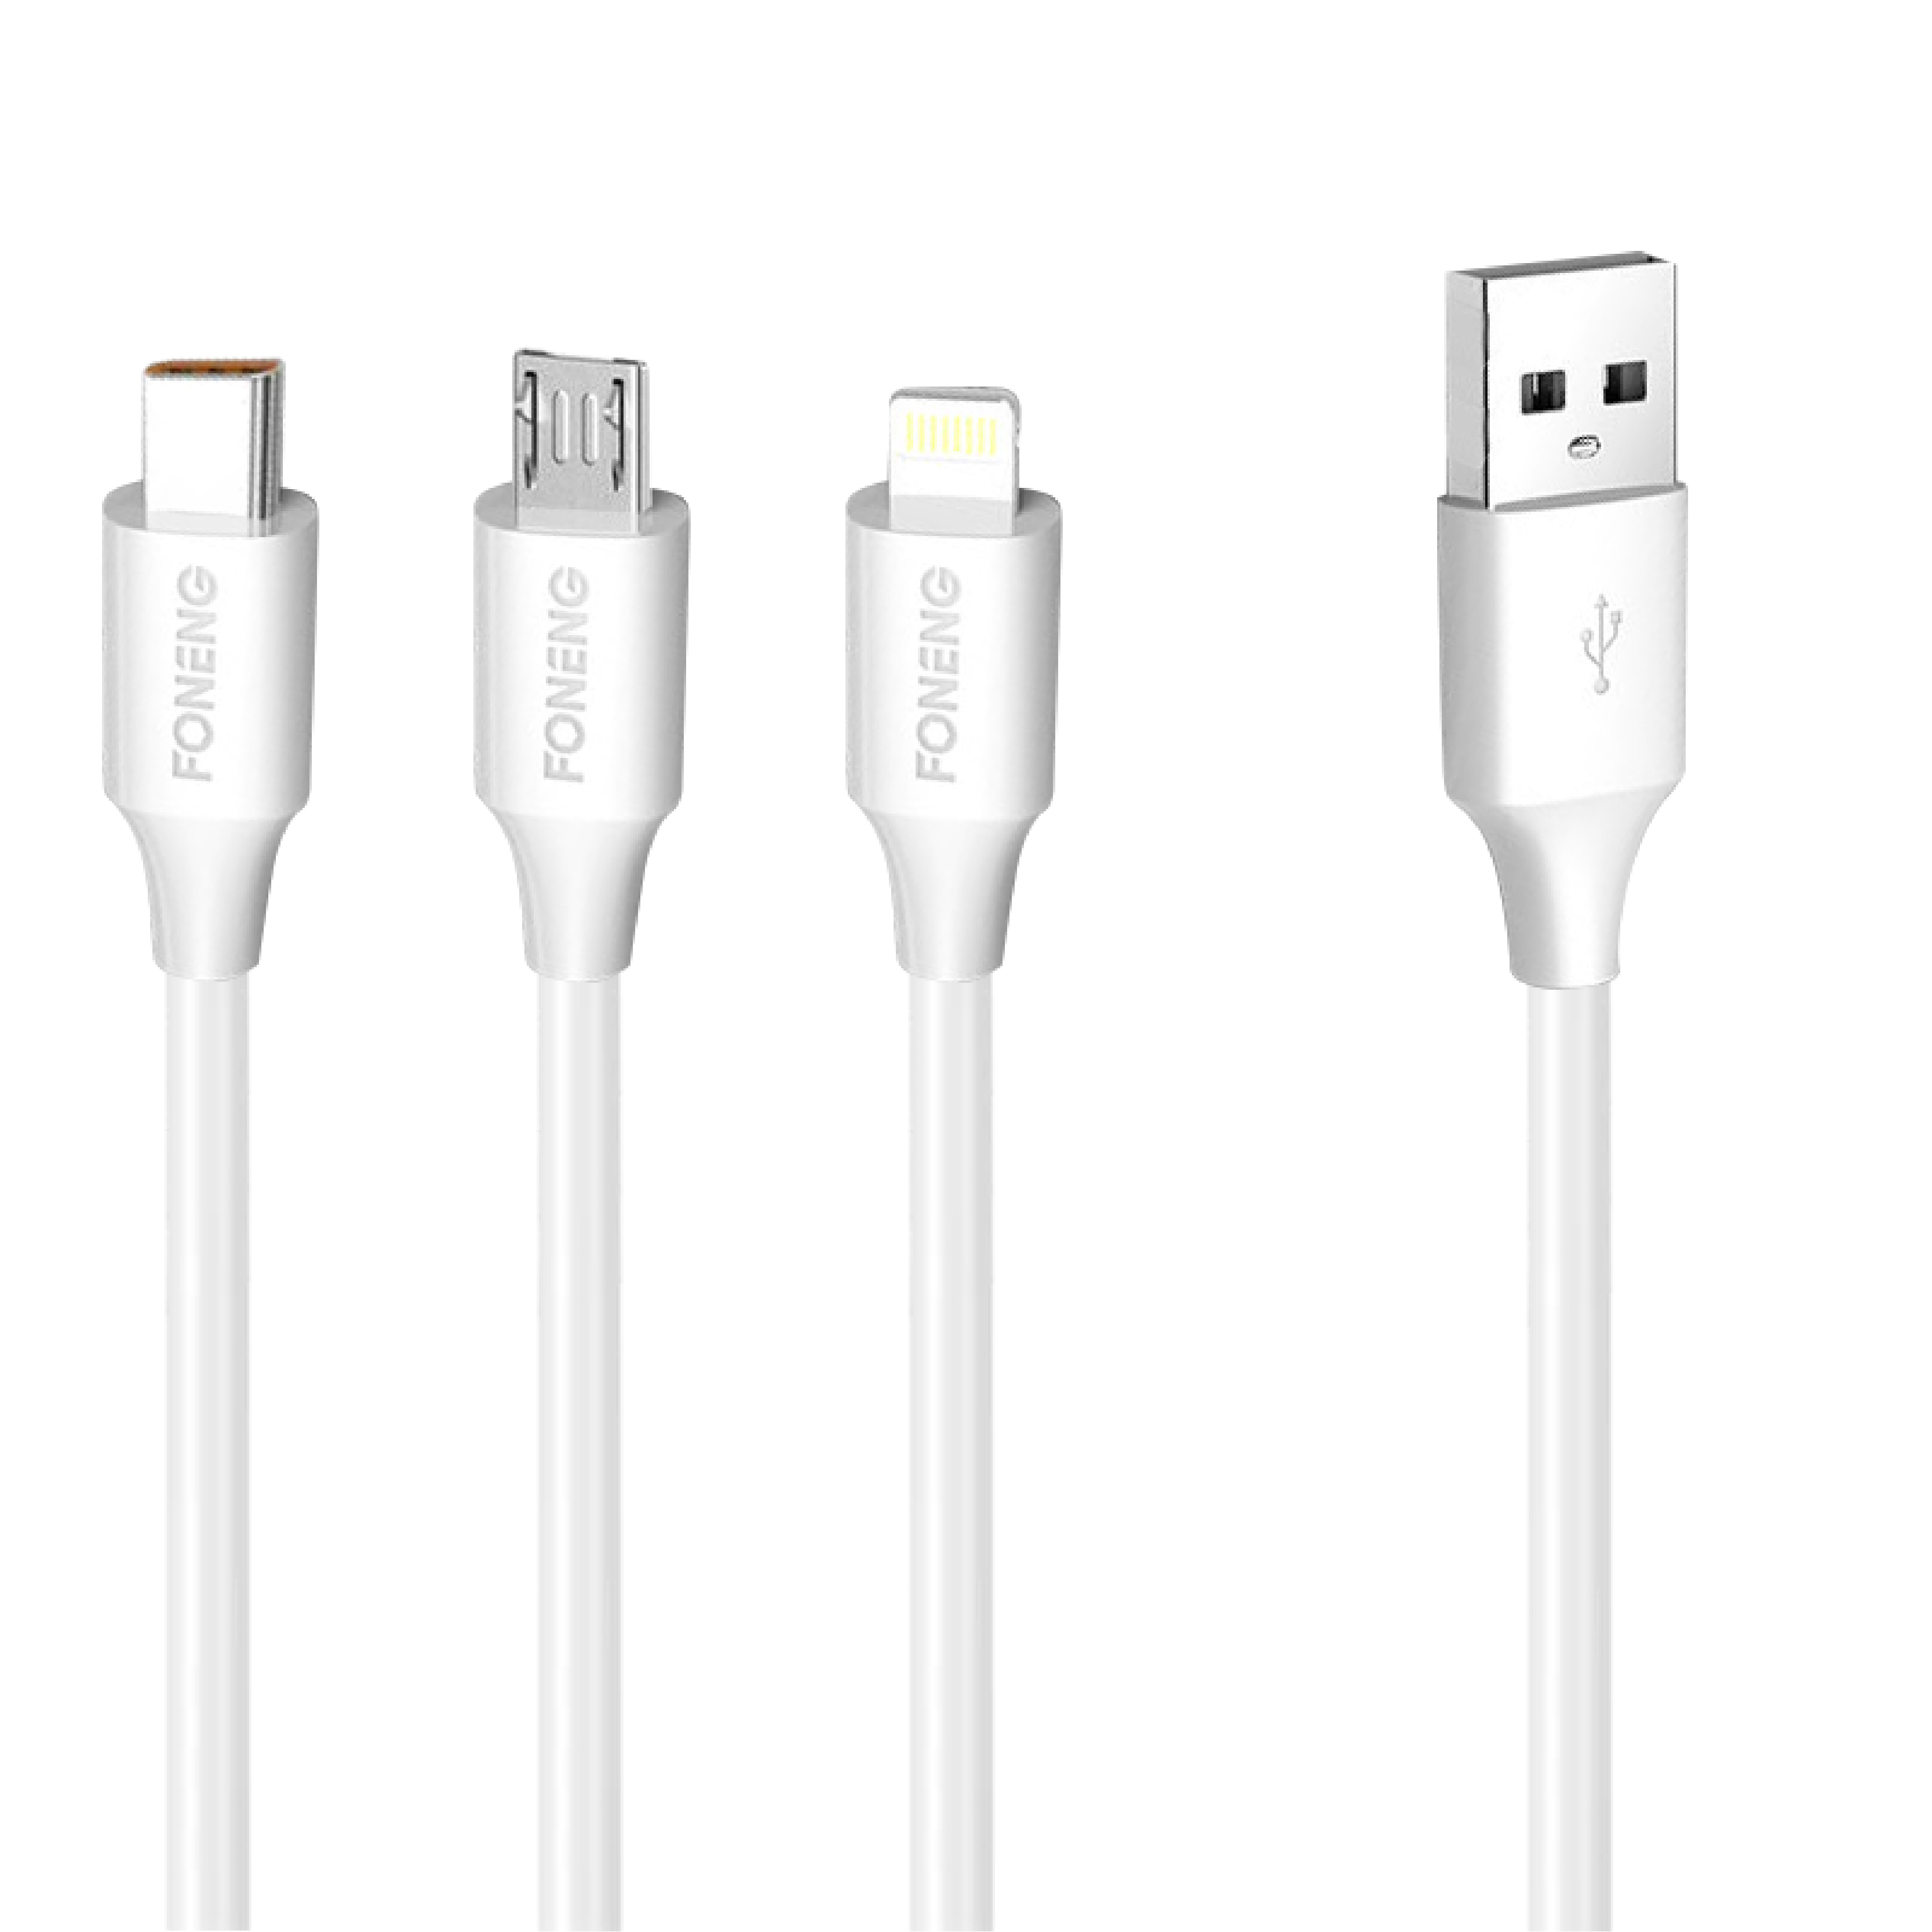 CABLE USB A MICRO / TIPO-C O IPHONE X63 2.1A 1MT FONENG